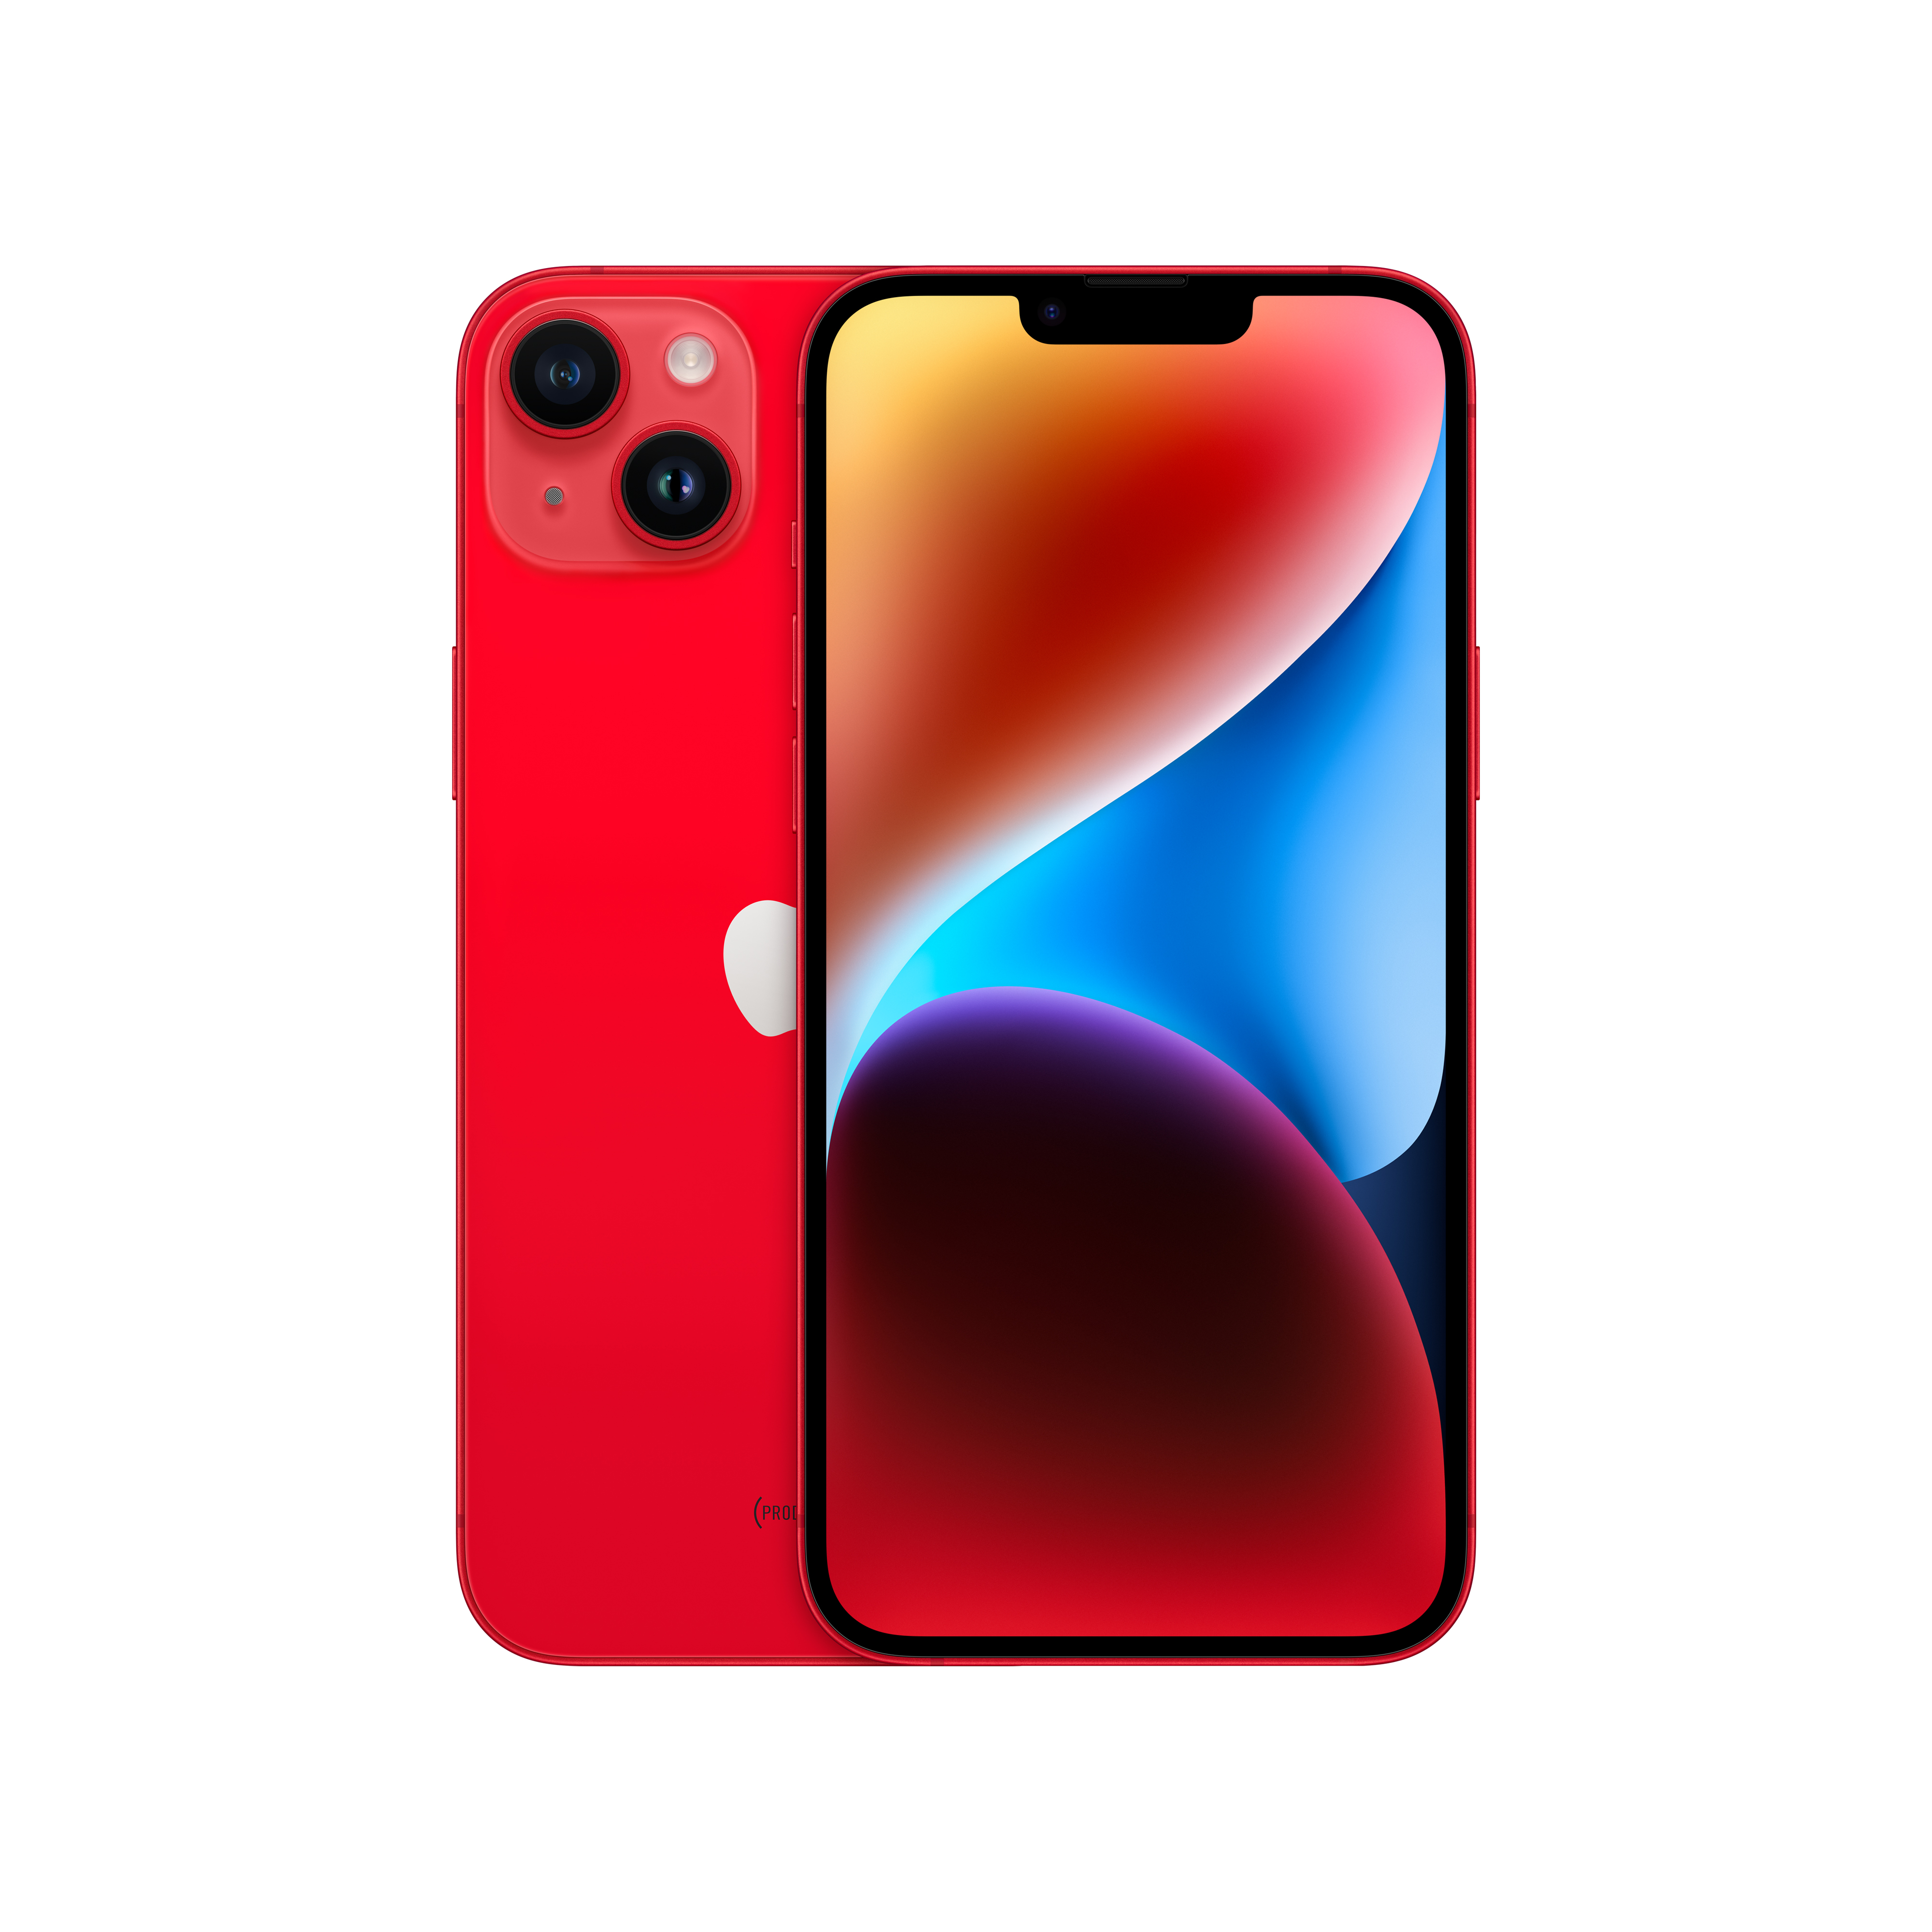 Apple iPhone 14 plus (MQ573HN/A) RED with 256GB, iOS 16, A15 Bionic chip, 6core CPU with 2 performance, 6.7 inch OLED display